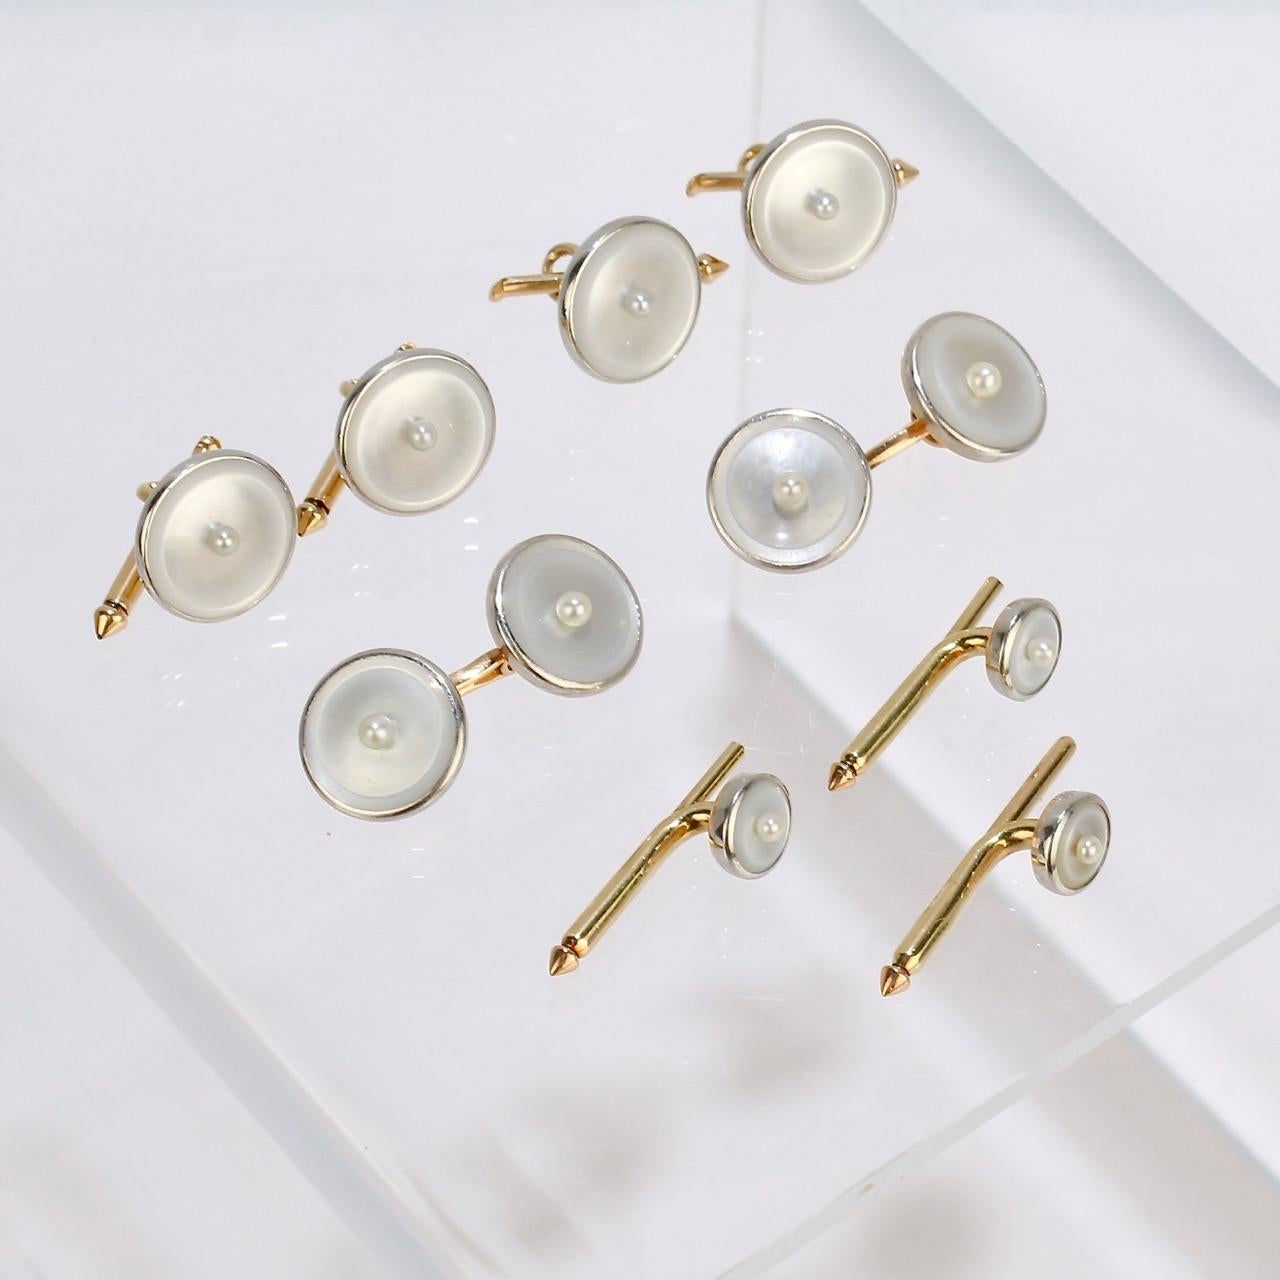 Art Deco 14 Karat Gold, Mother of Pearl and Seed Pearl Cufflink and Dress Set 1